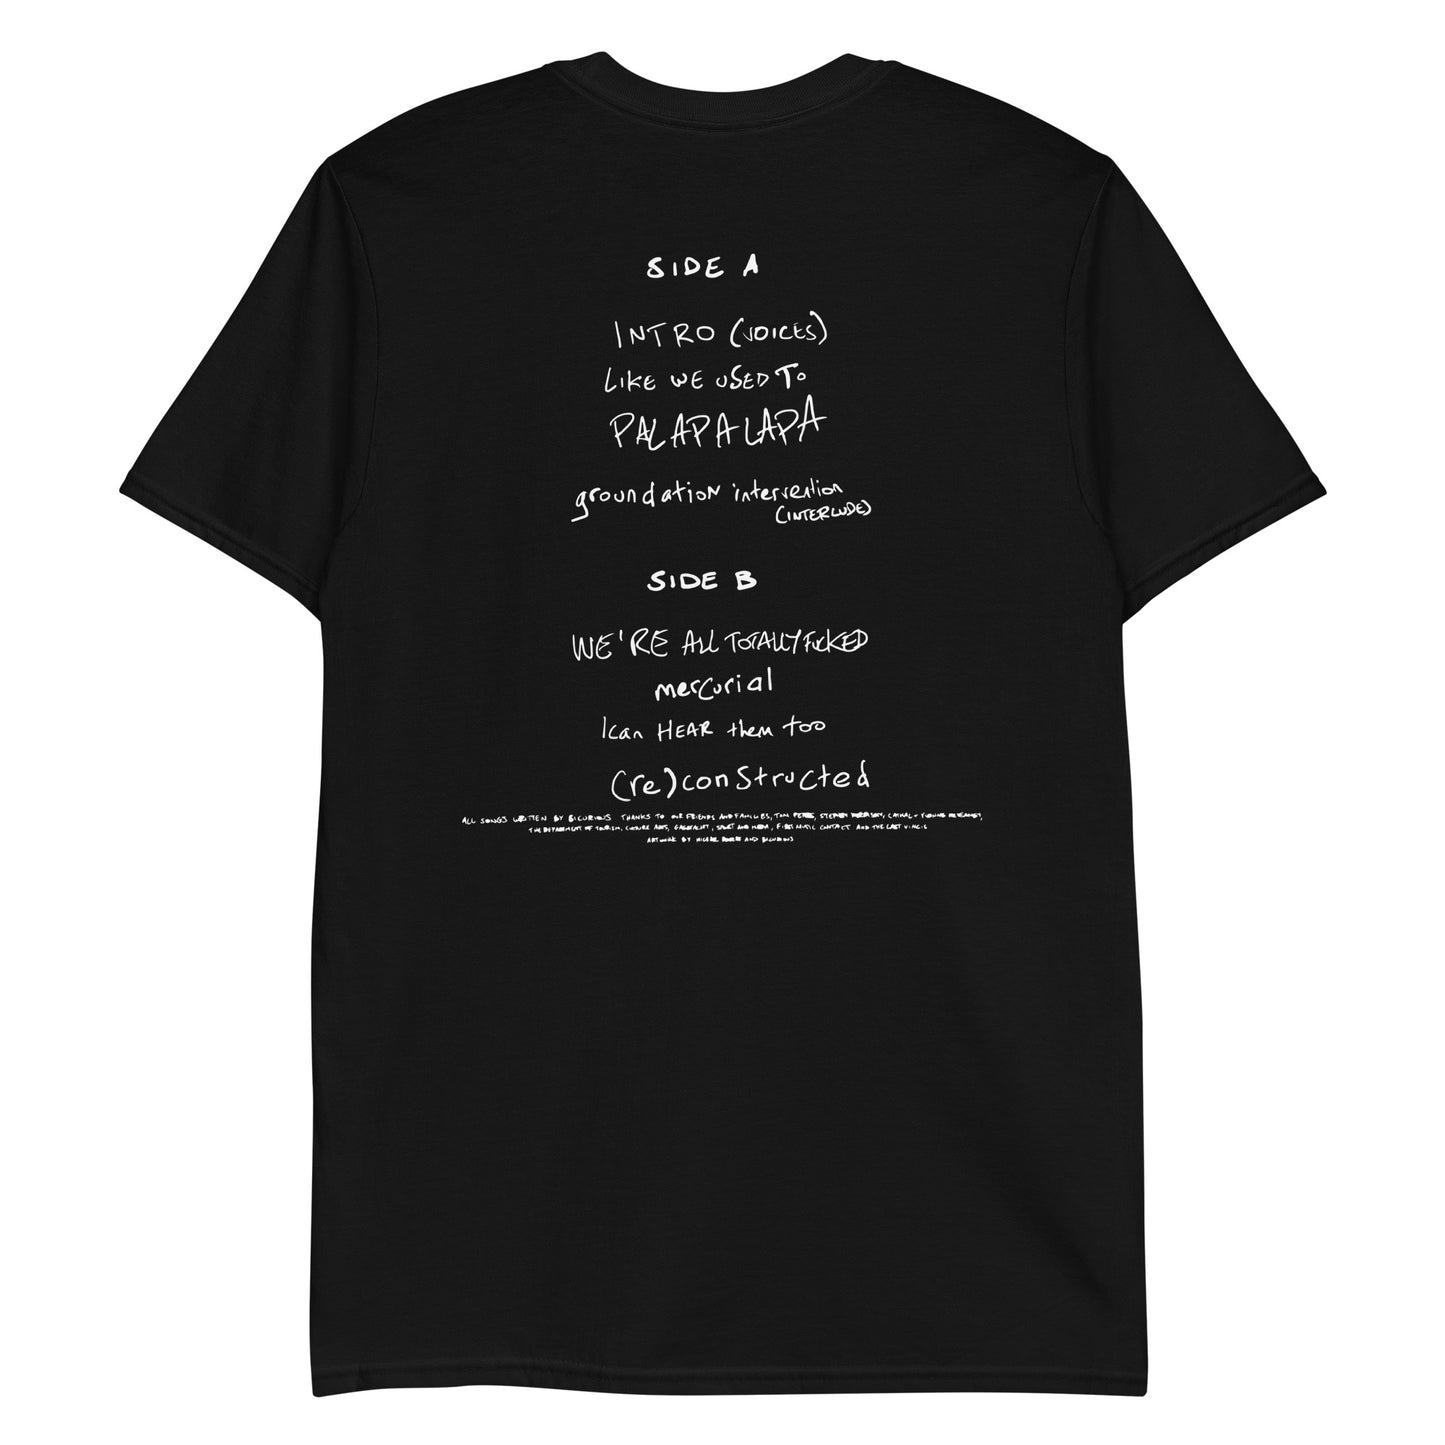 (re)constructed Tee (Black)